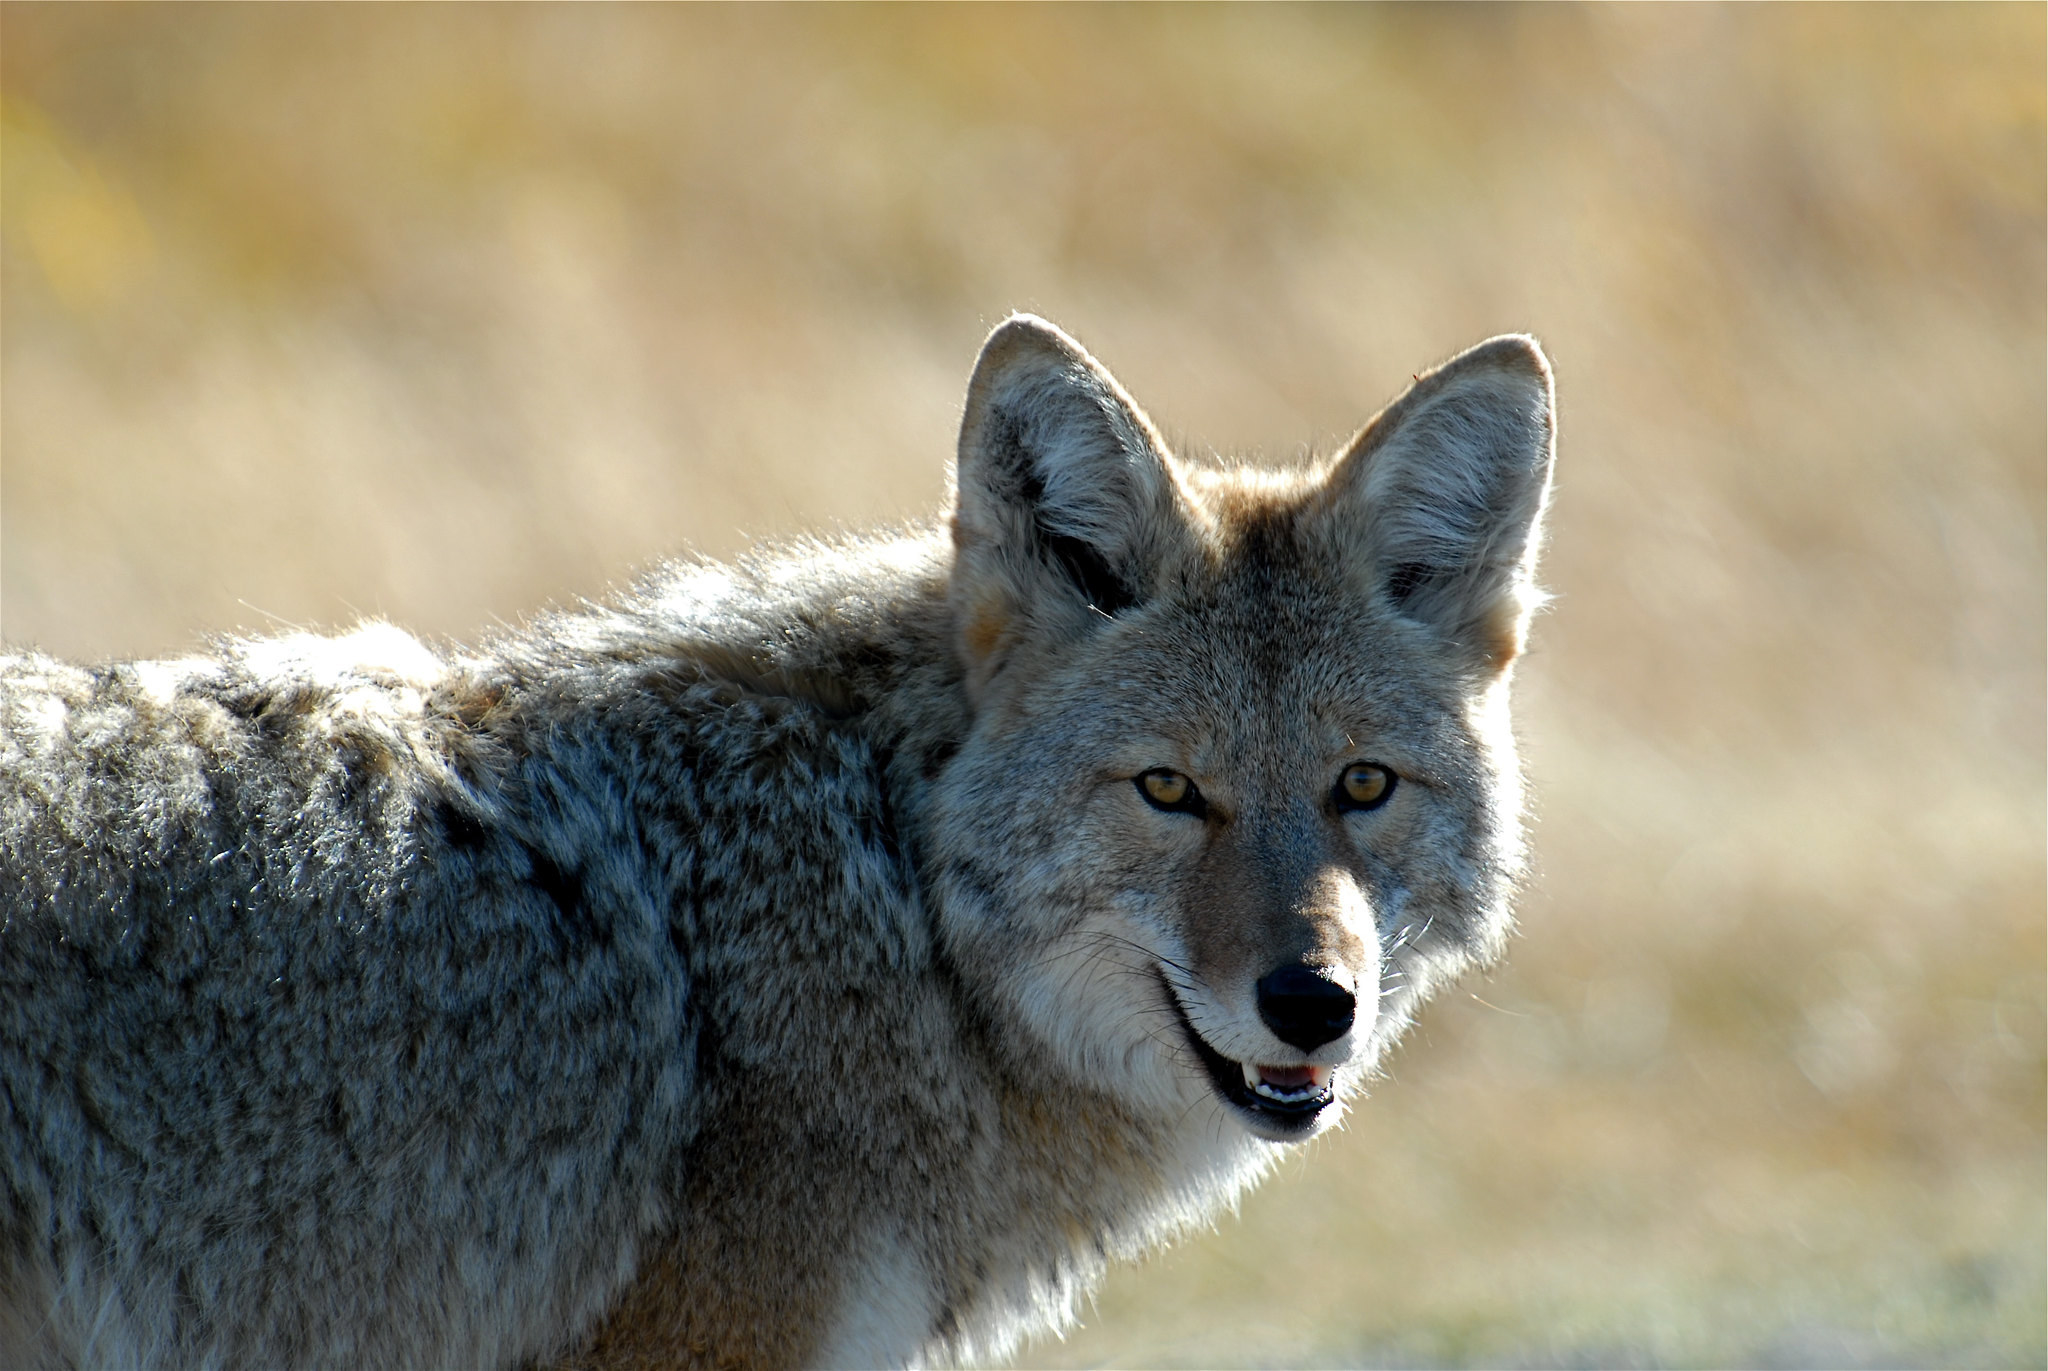 A close up of a coyote&#x27;s face.